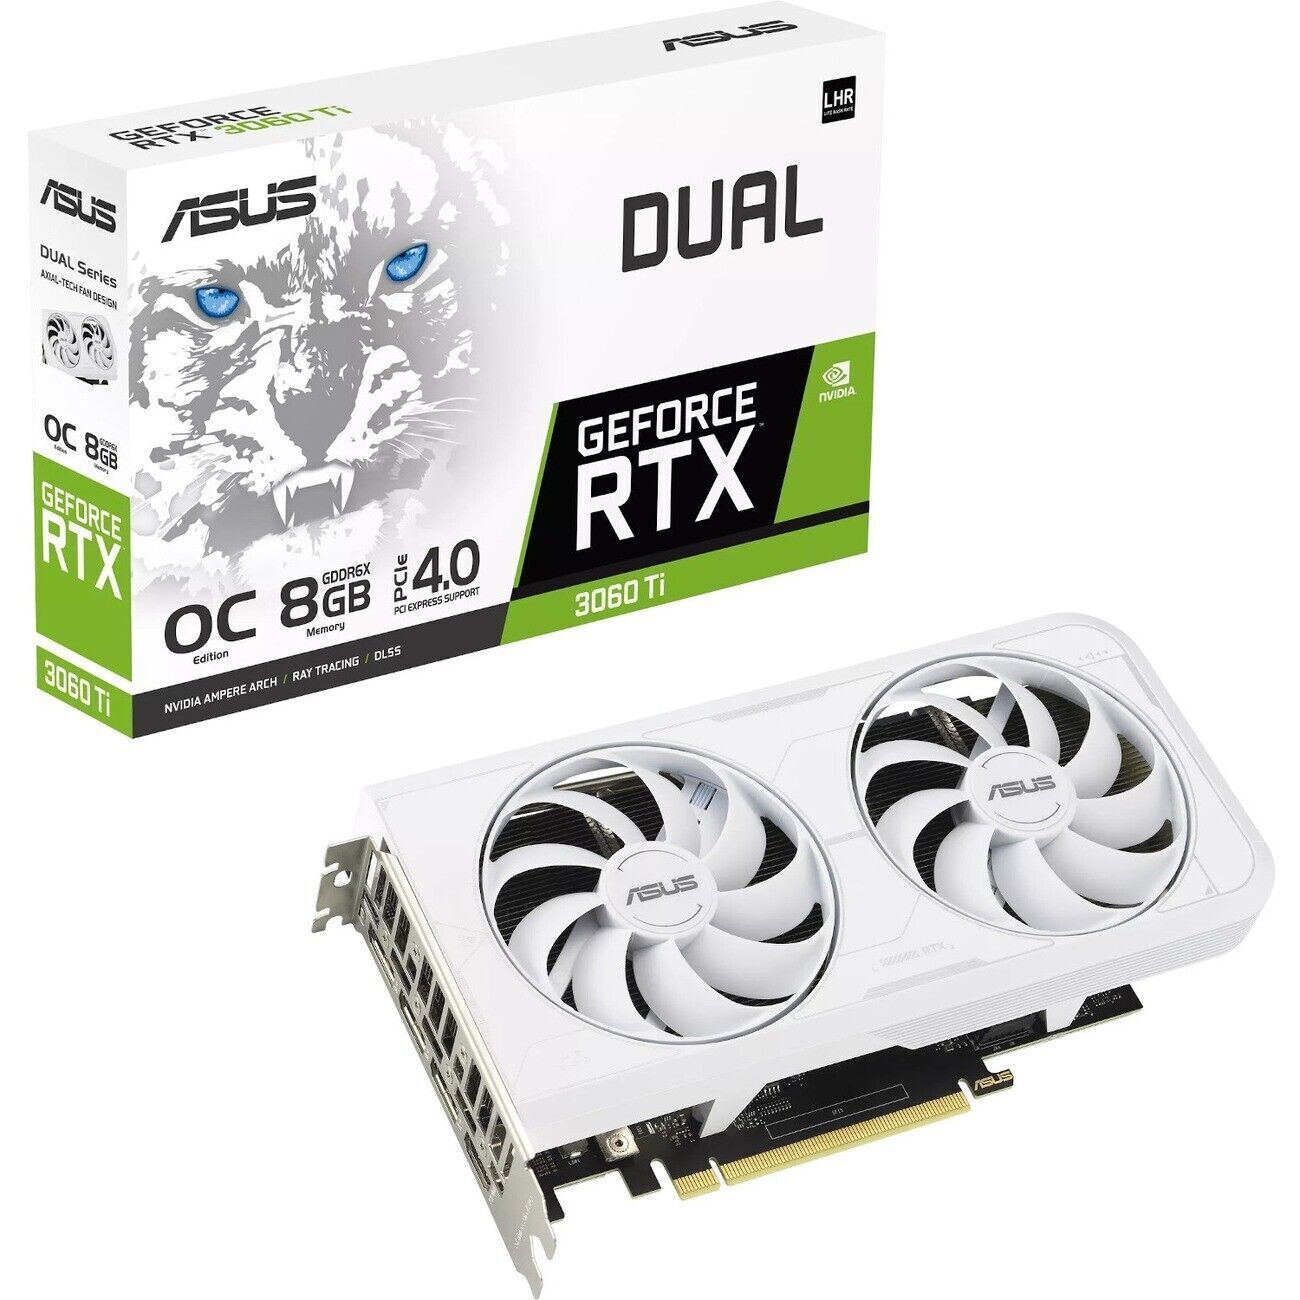 ASUS Dual NVIDIA GeForce RTX 3060 Ti White OC Edition Graphics Card (PCIe 4.0,